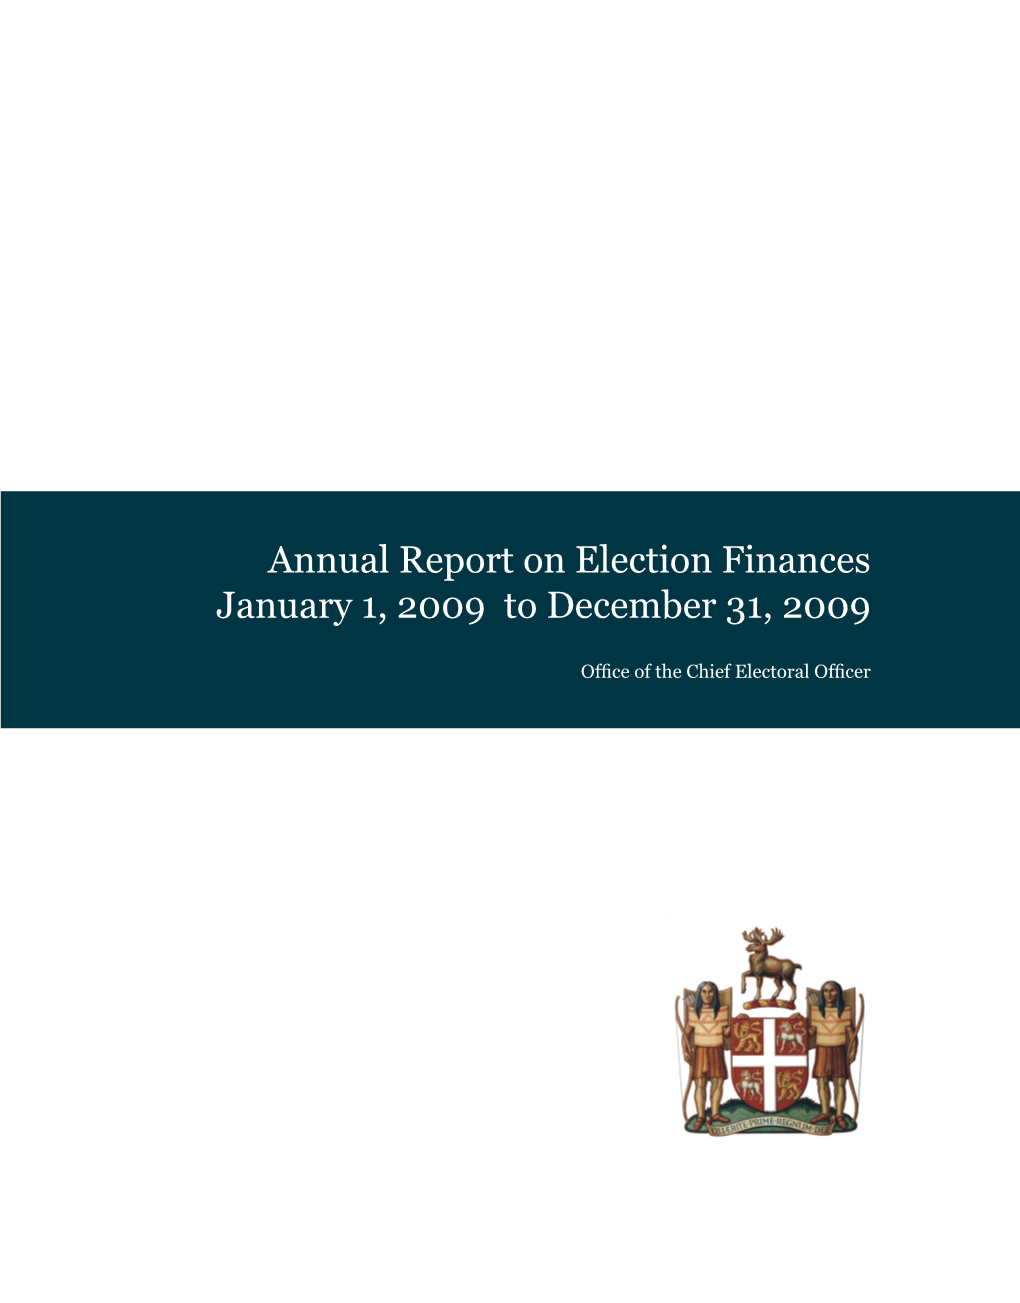 Annual Report on Election Finances January 1, 2009 to December 31, 2009